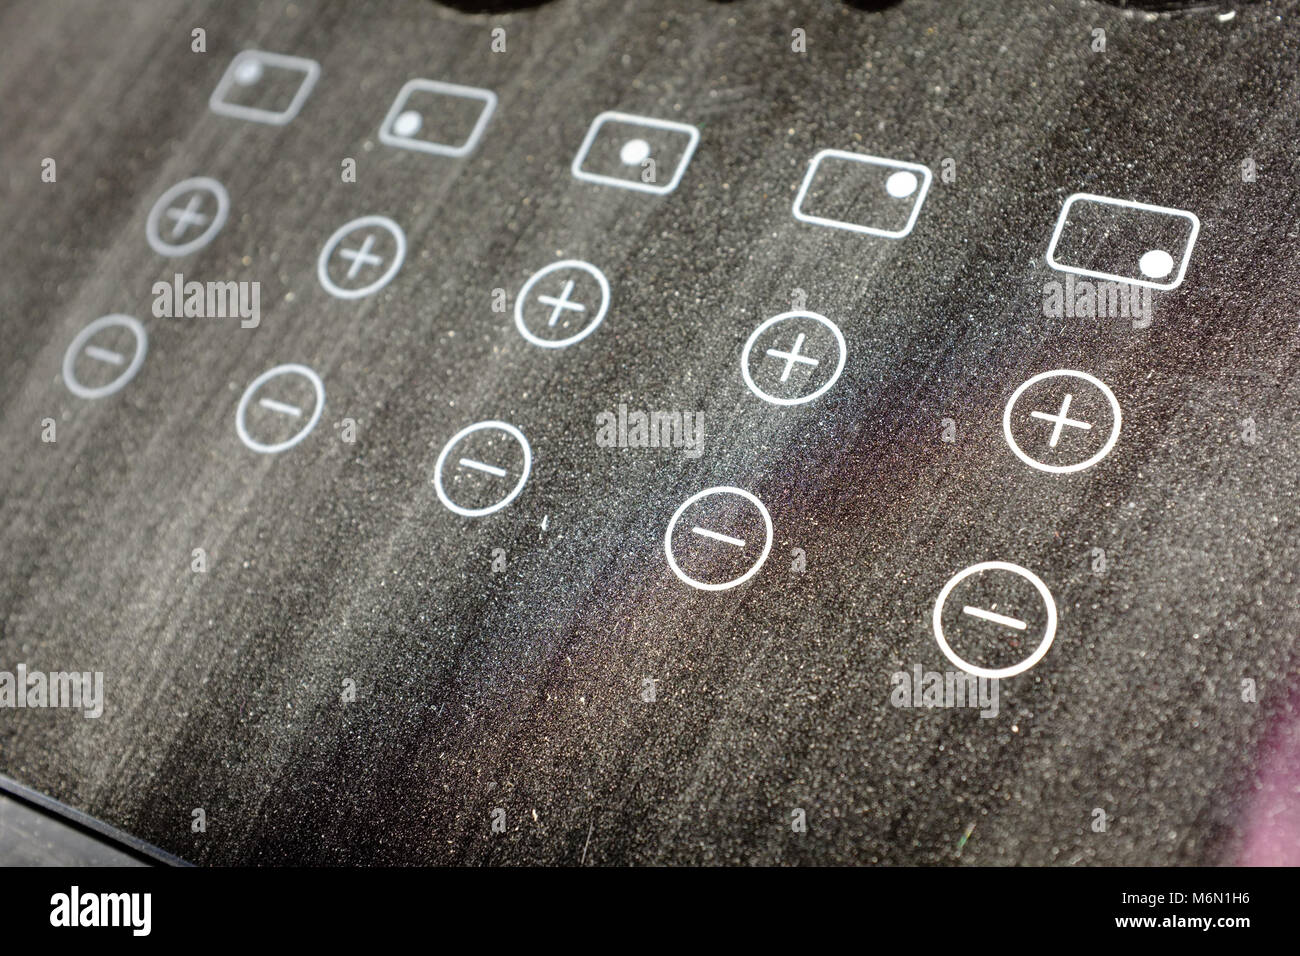 Push button controls on a dusty induction cooking hob Stock Photo